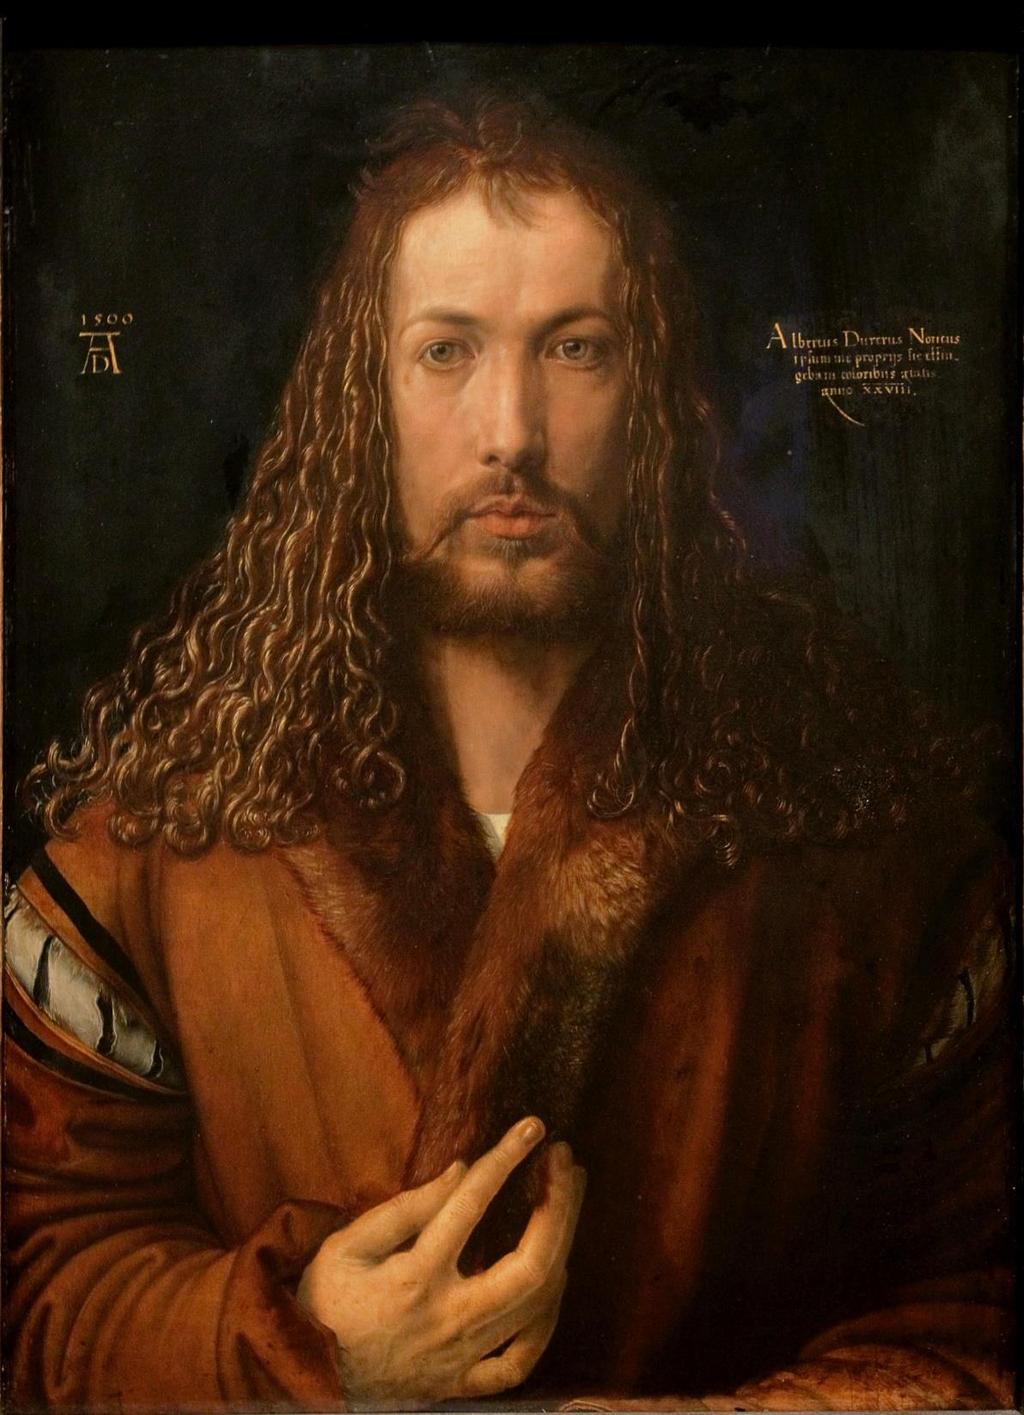 Durer's Self-Portrait Take a look at this picture. Who do you see? If you said Jesus, you're wrong.